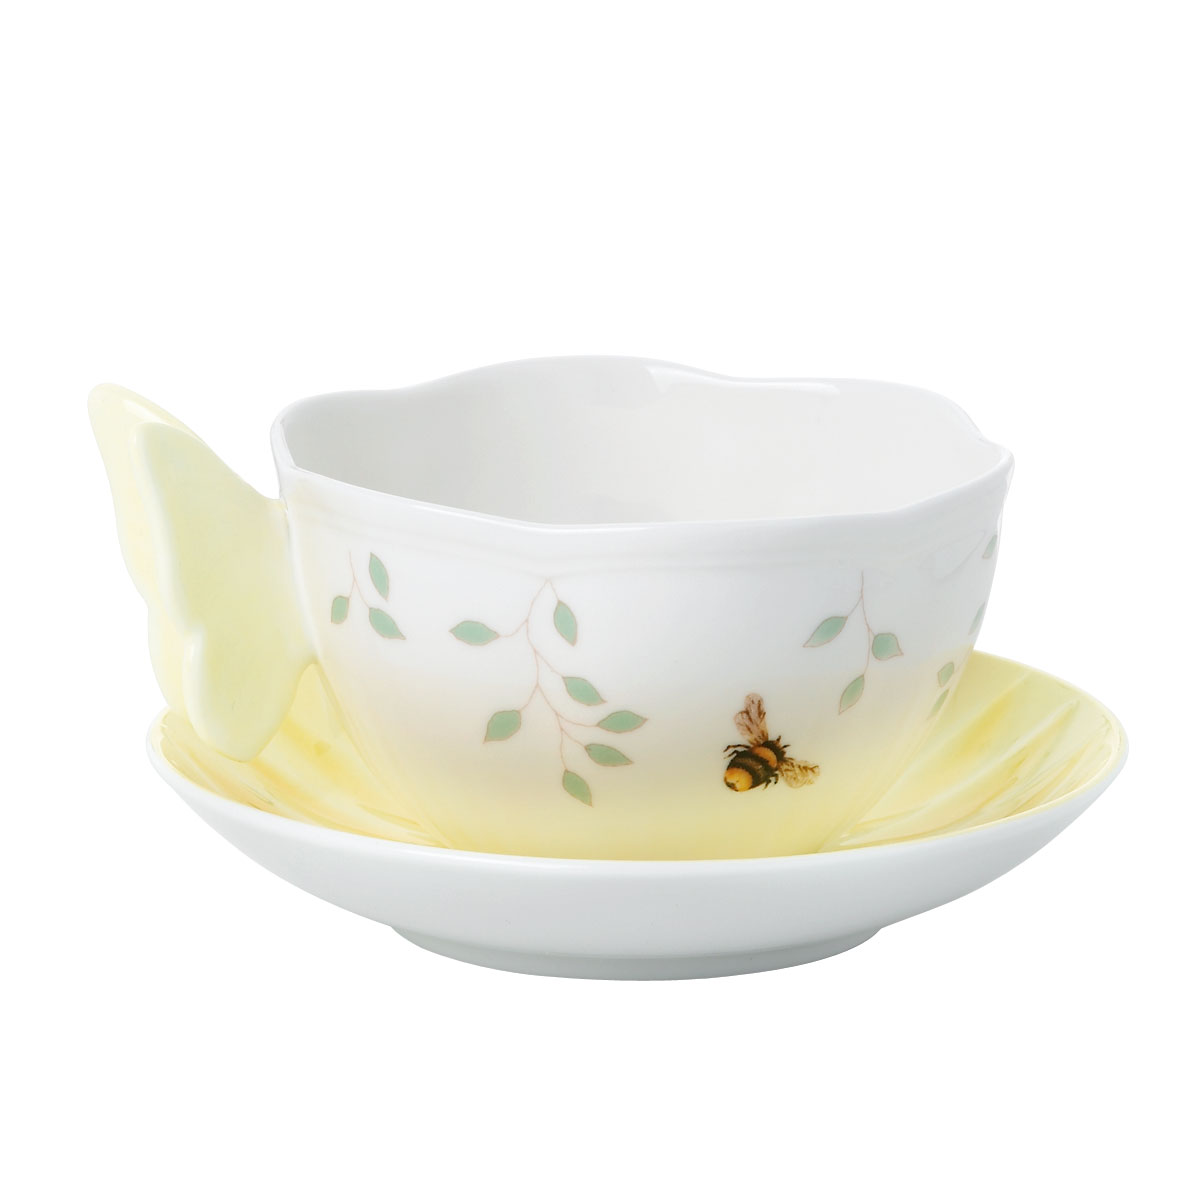 Lenox Butterfly Meadow China Figurine Yel Cup And Saucer